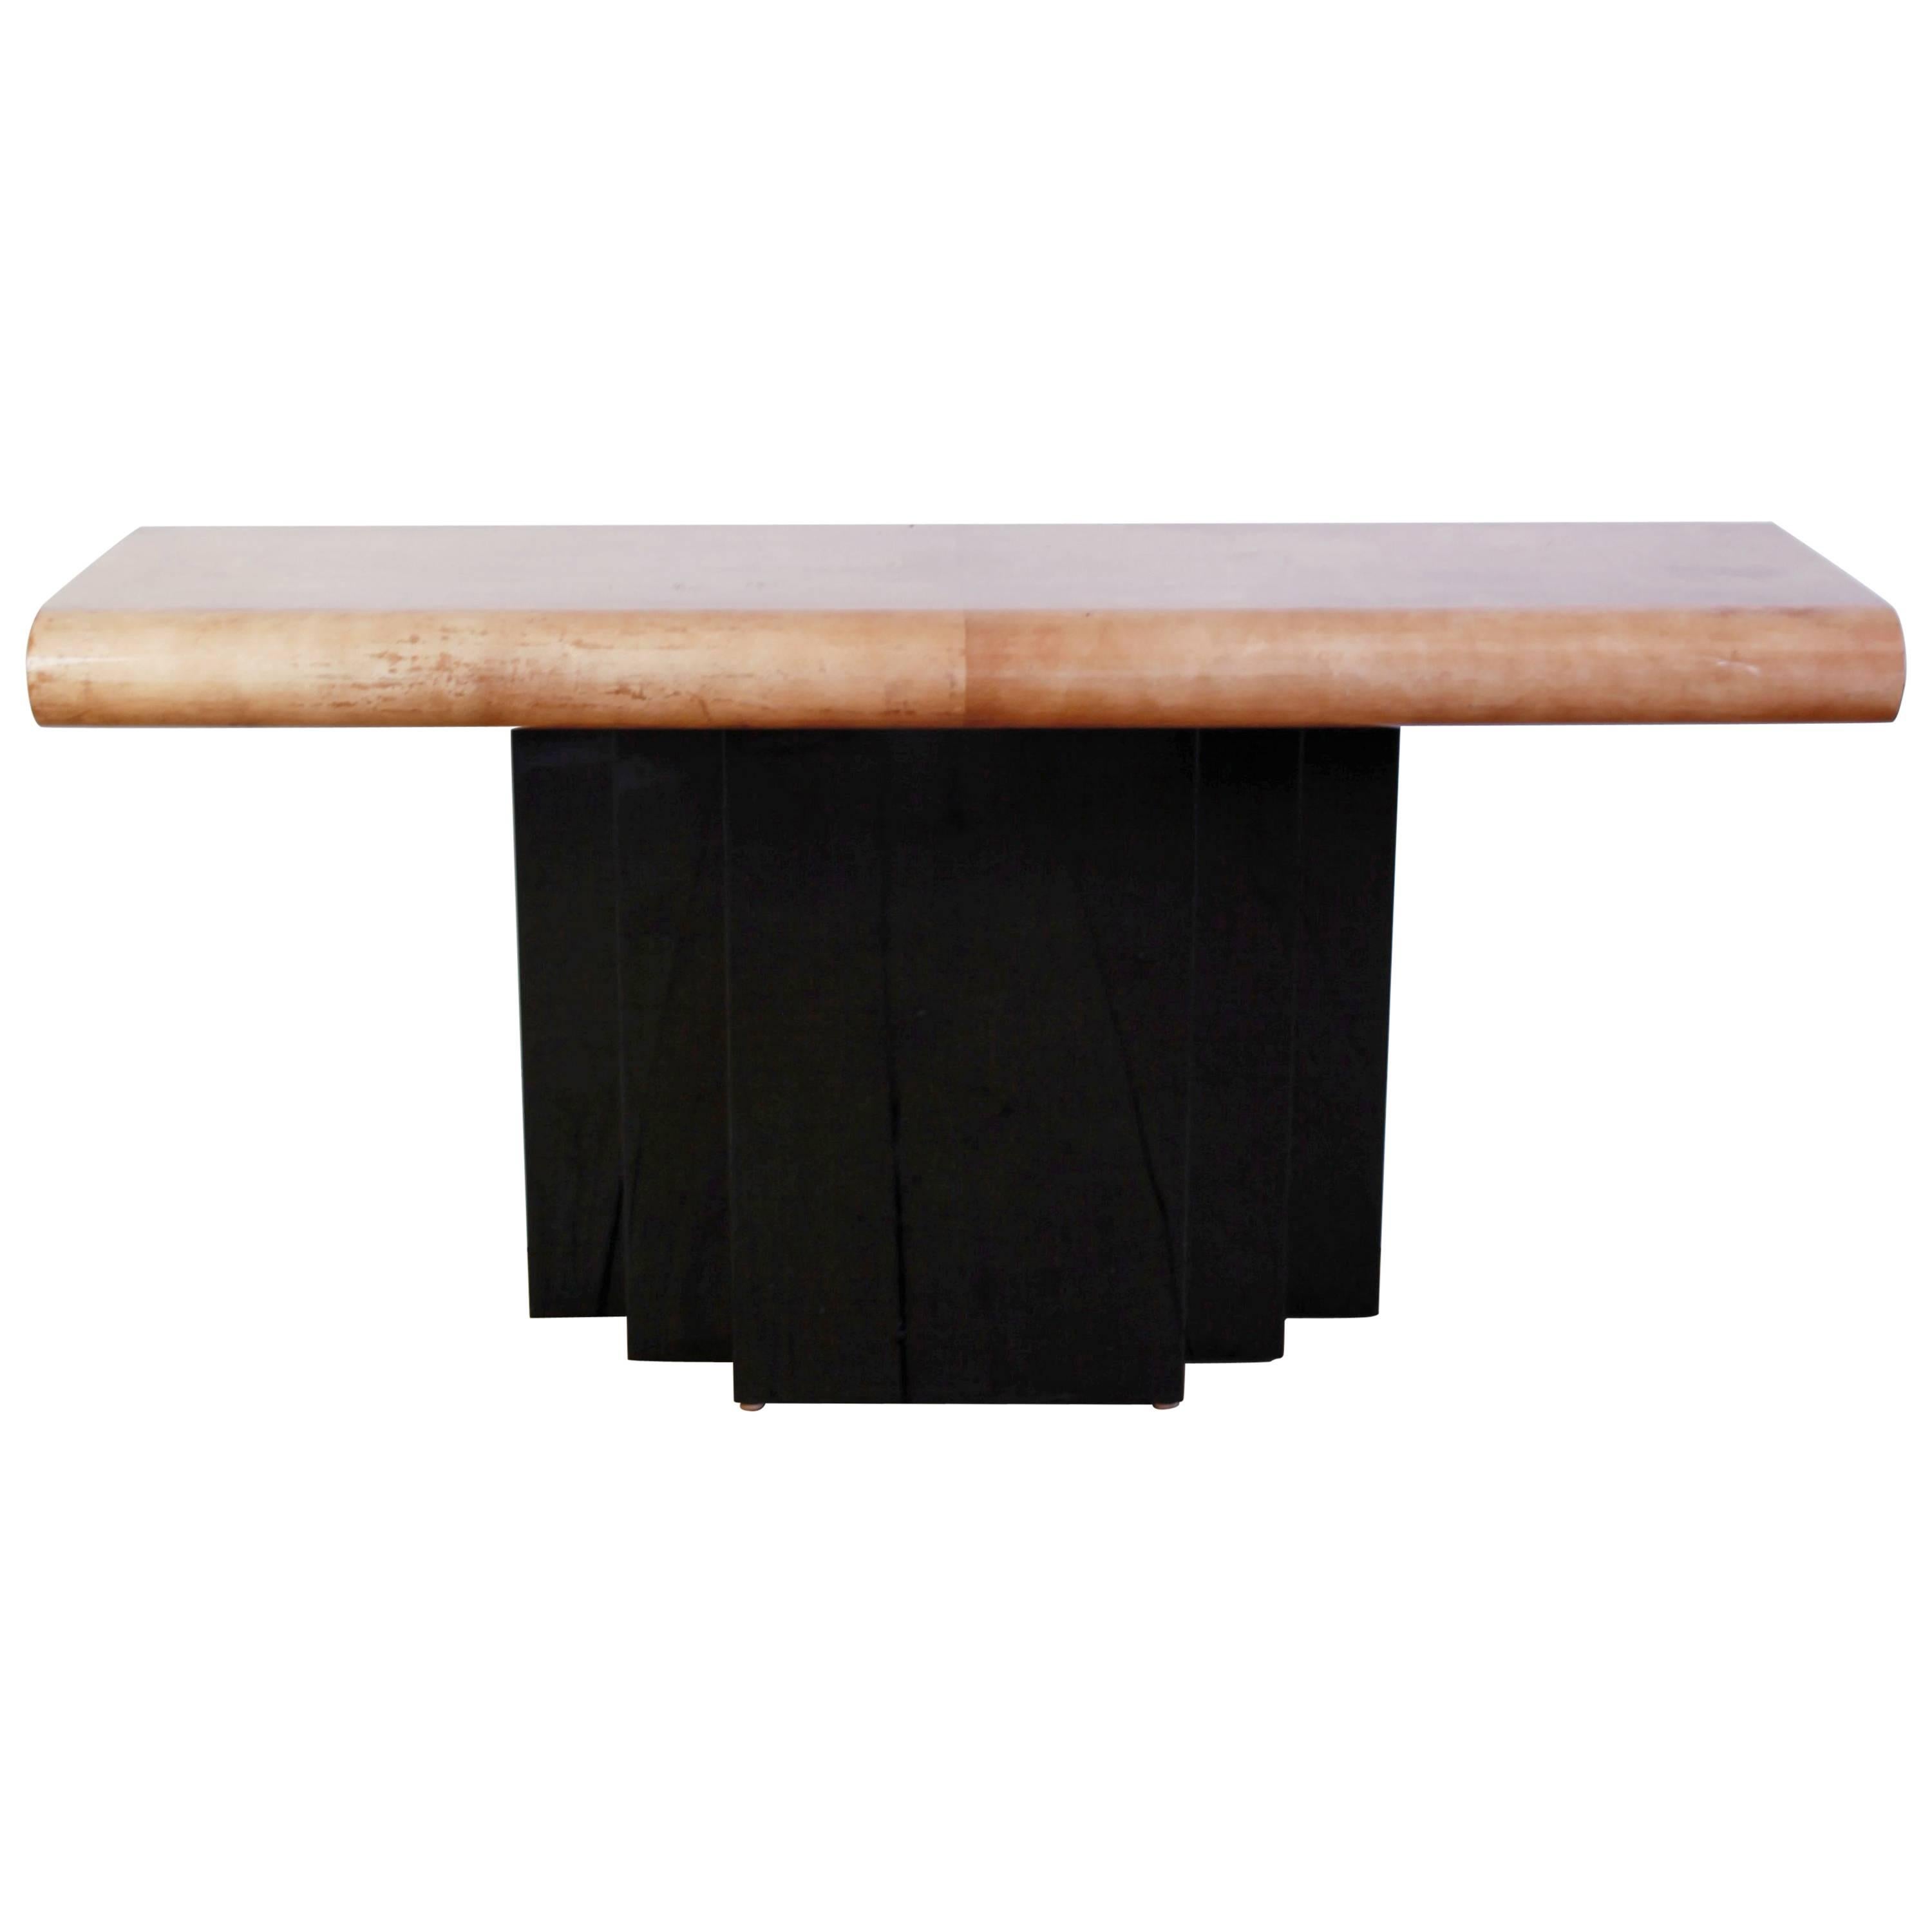 Aldo Tura Parchment and Lacquered Wood Console